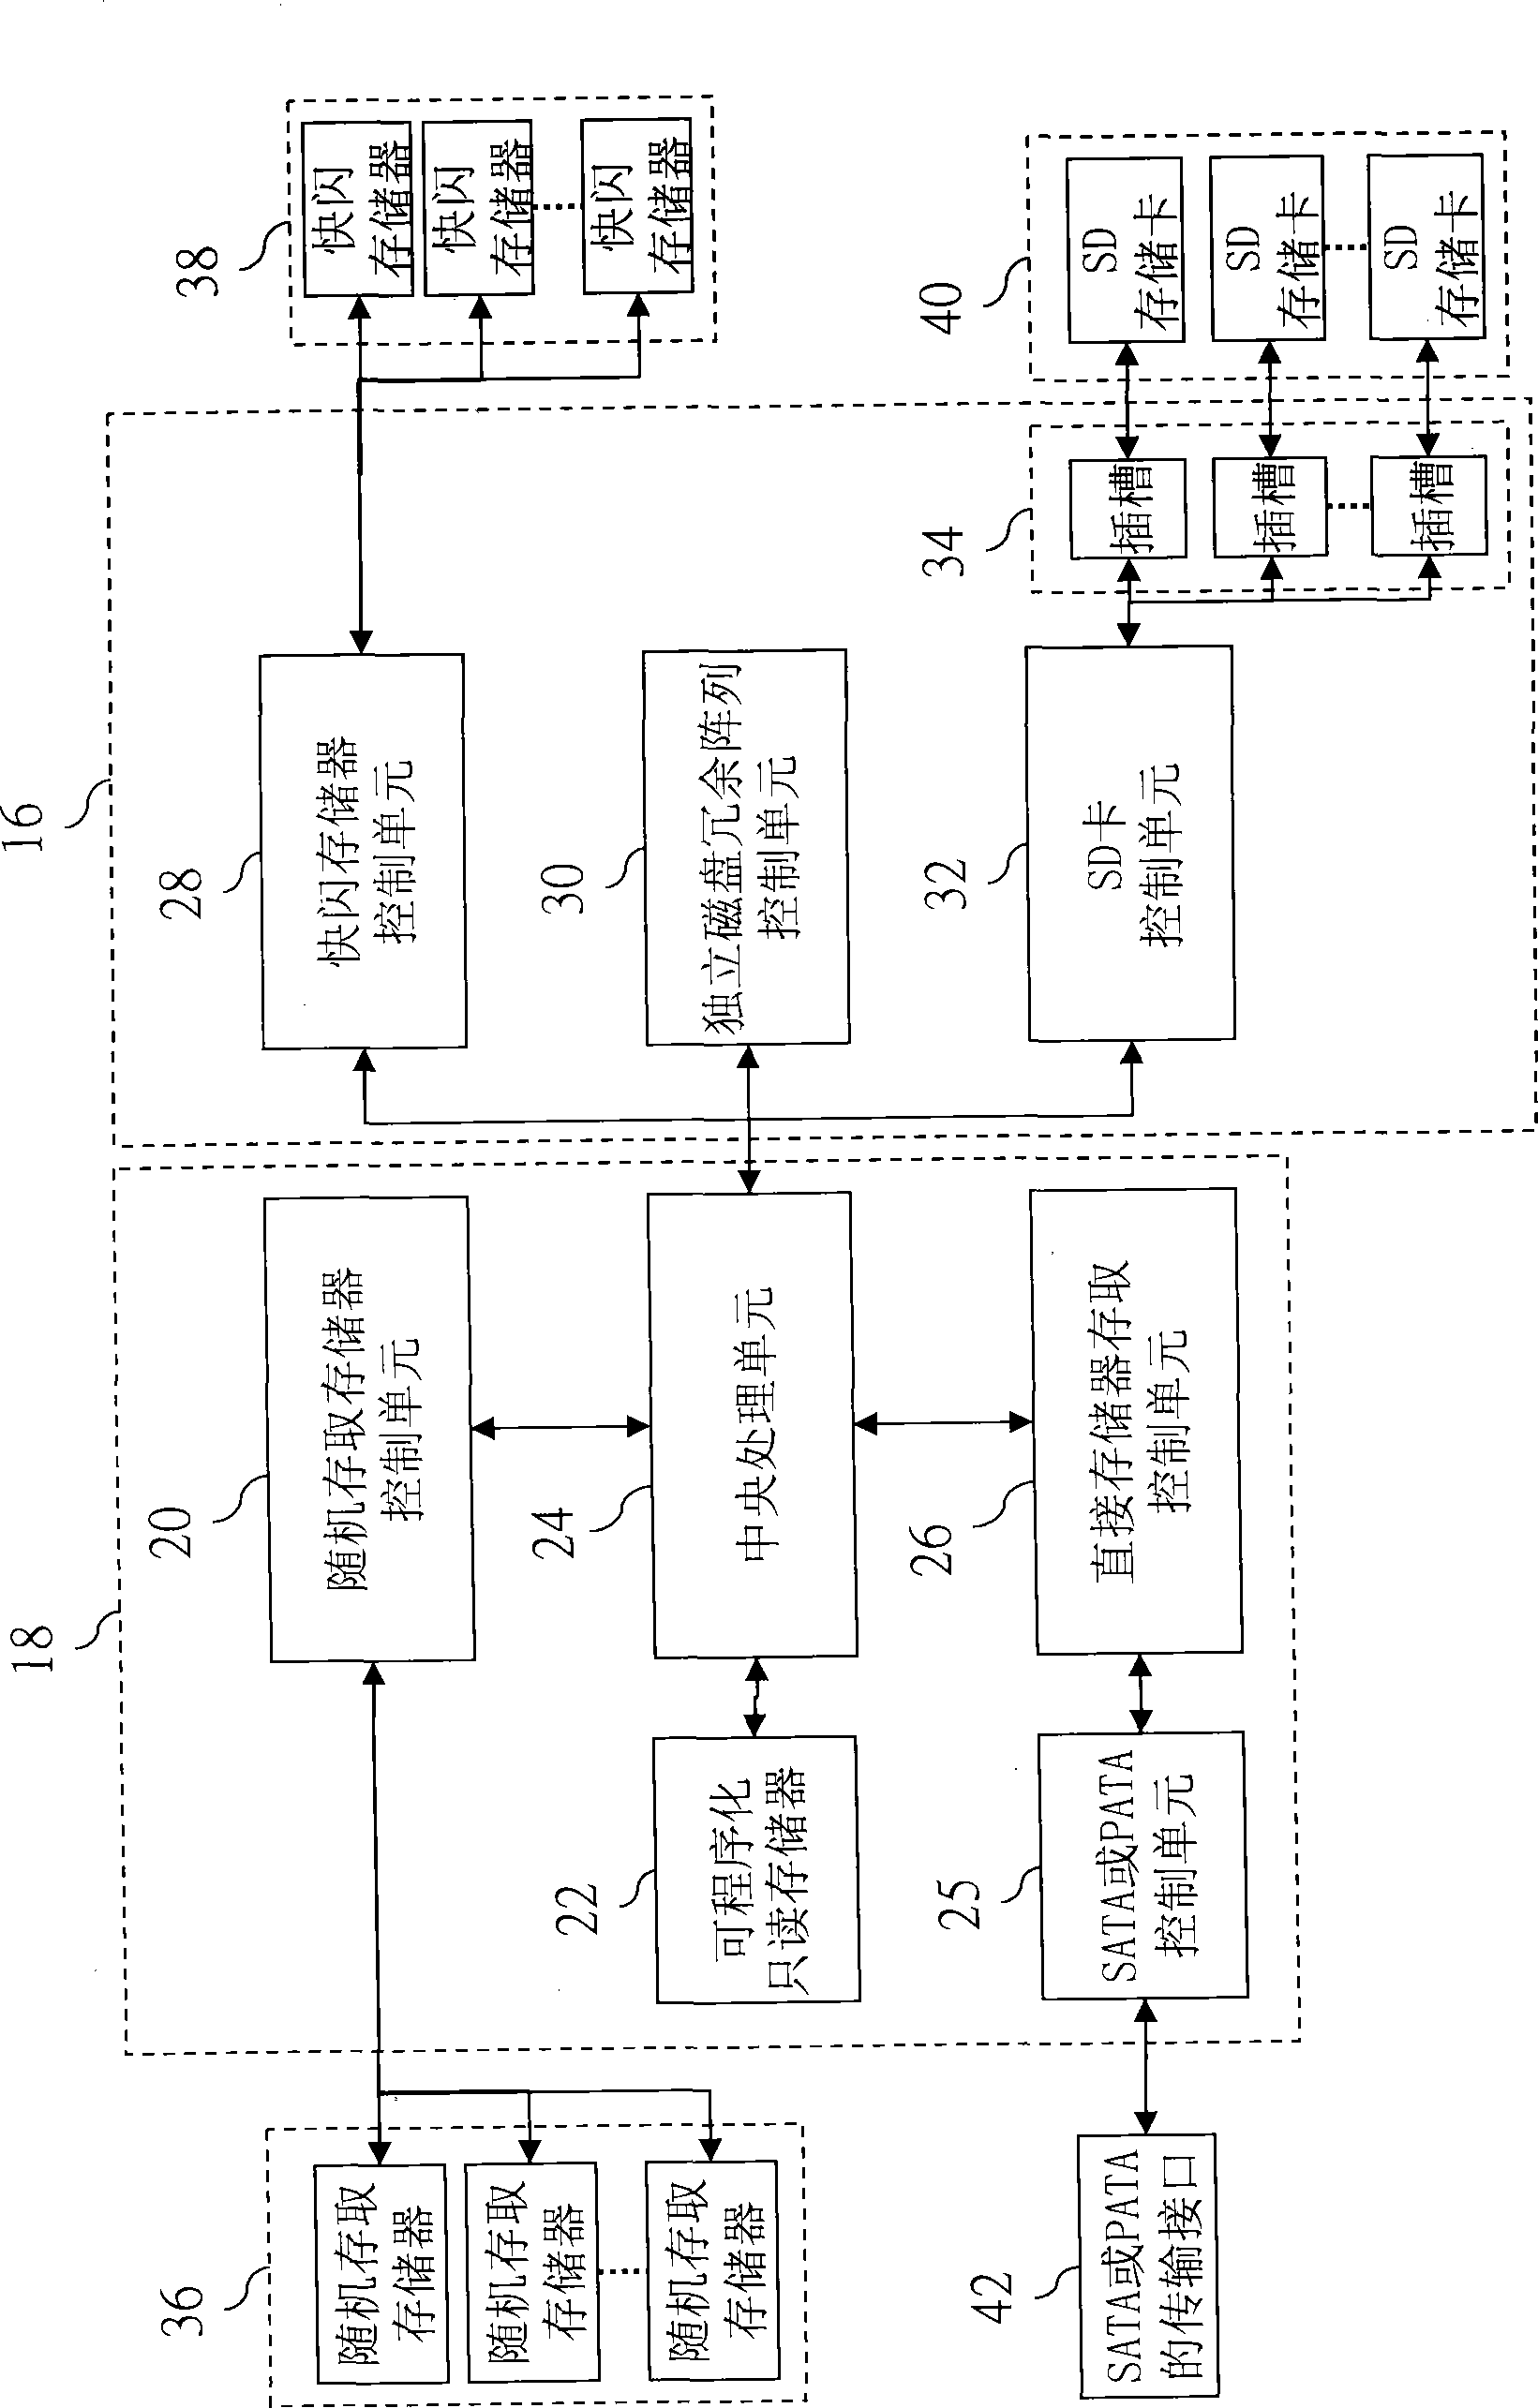 Compound solid state drive control system